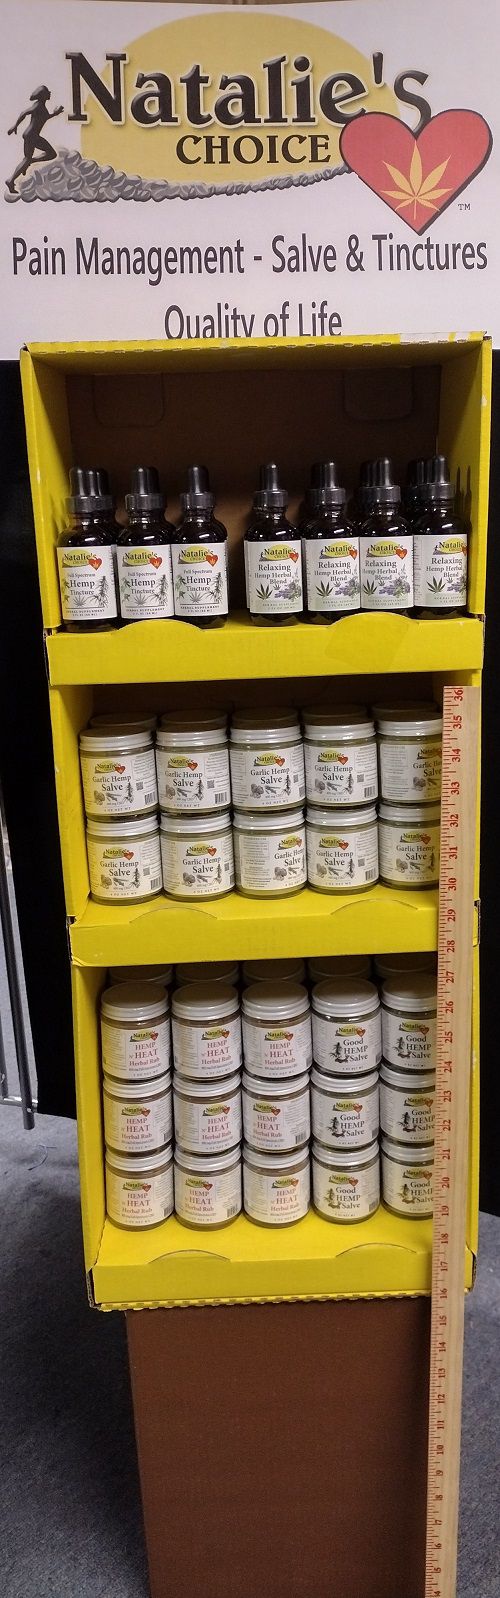 NataliesChoice(tm) yellow bright display with topicals and tincture bottles on it, 3 shelves.